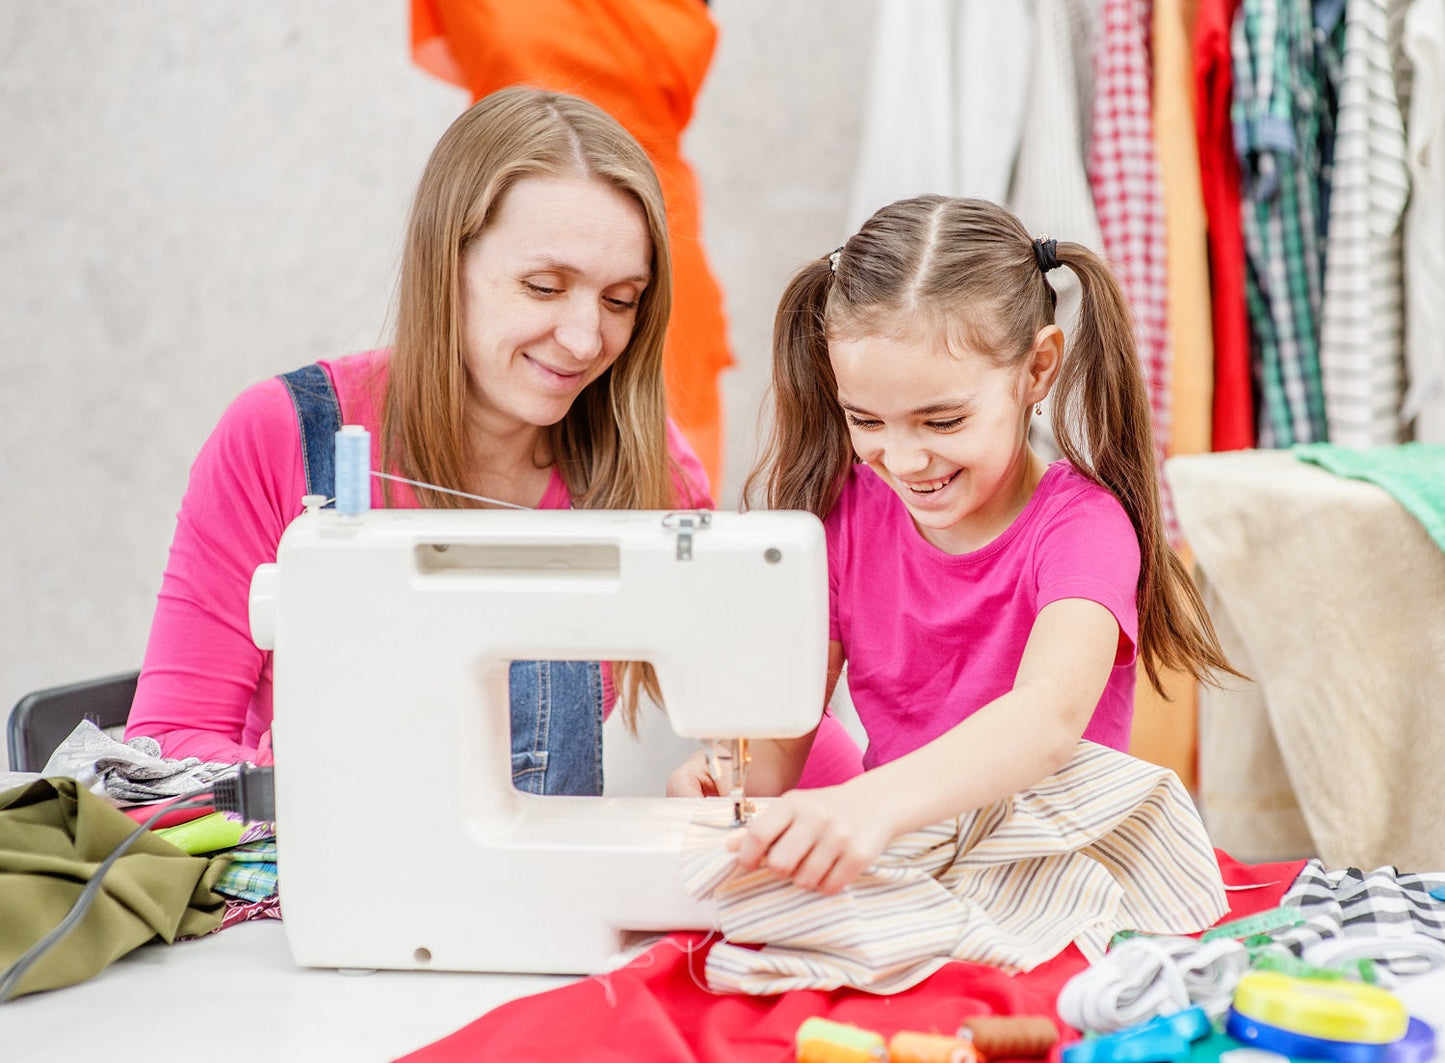 Sewing: A Heart-warming Tradition to Pass Down to Your Children